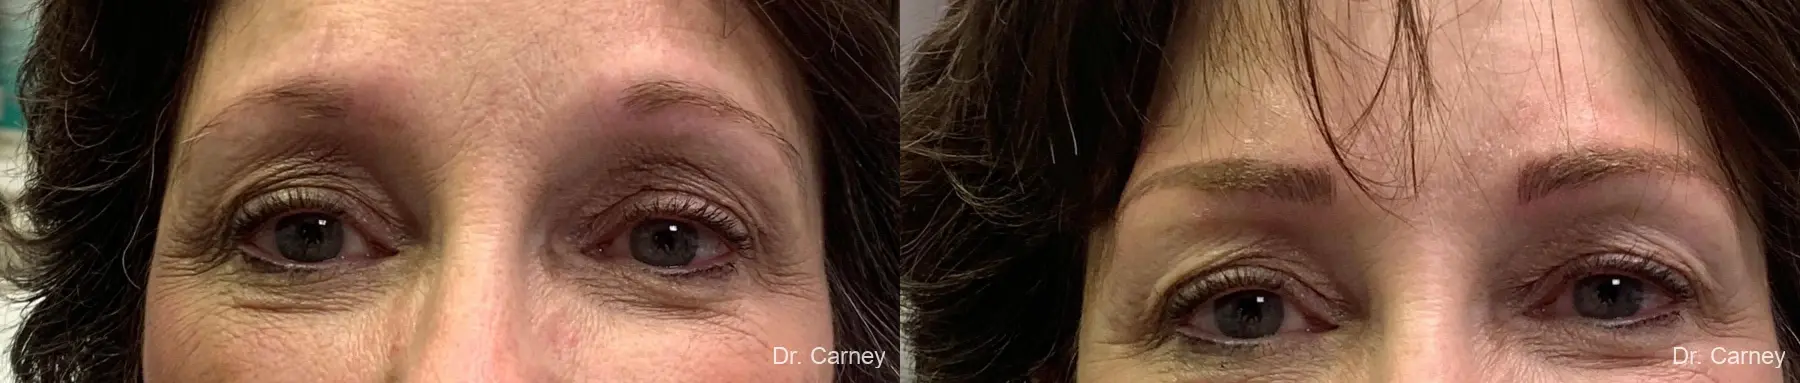 Microblading: Patient 3 - Before and After  